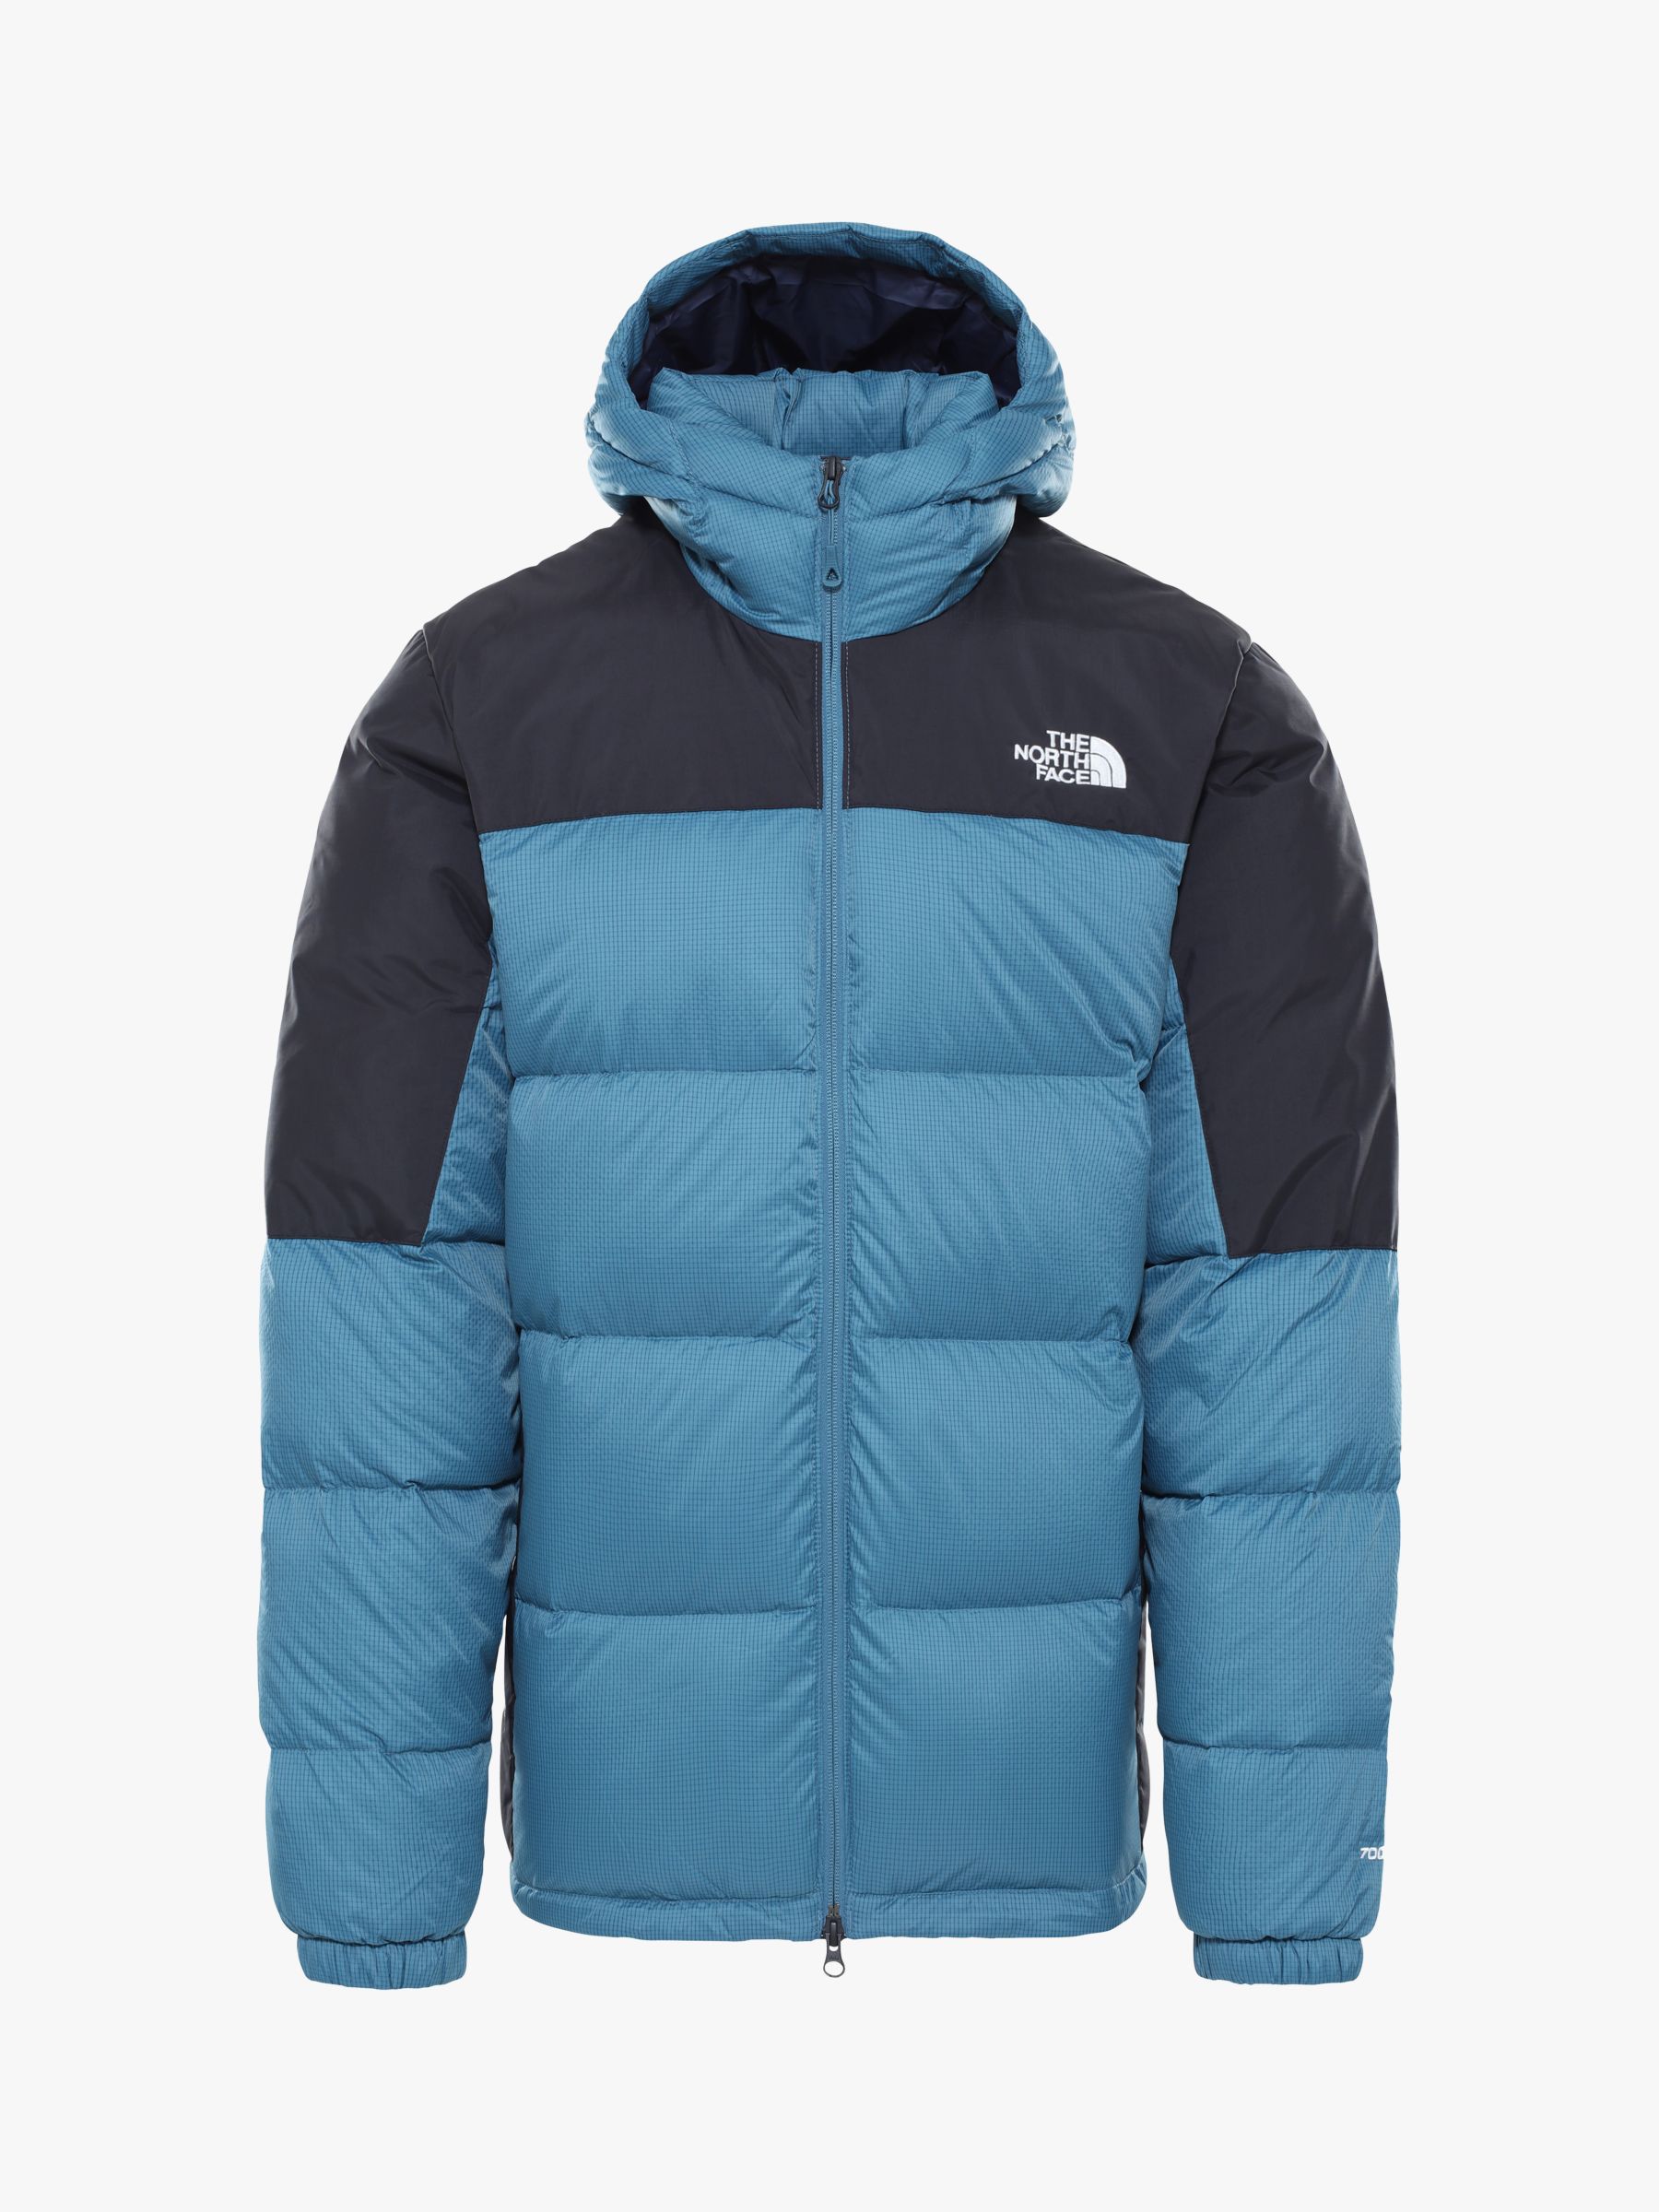 north face coats with hoods